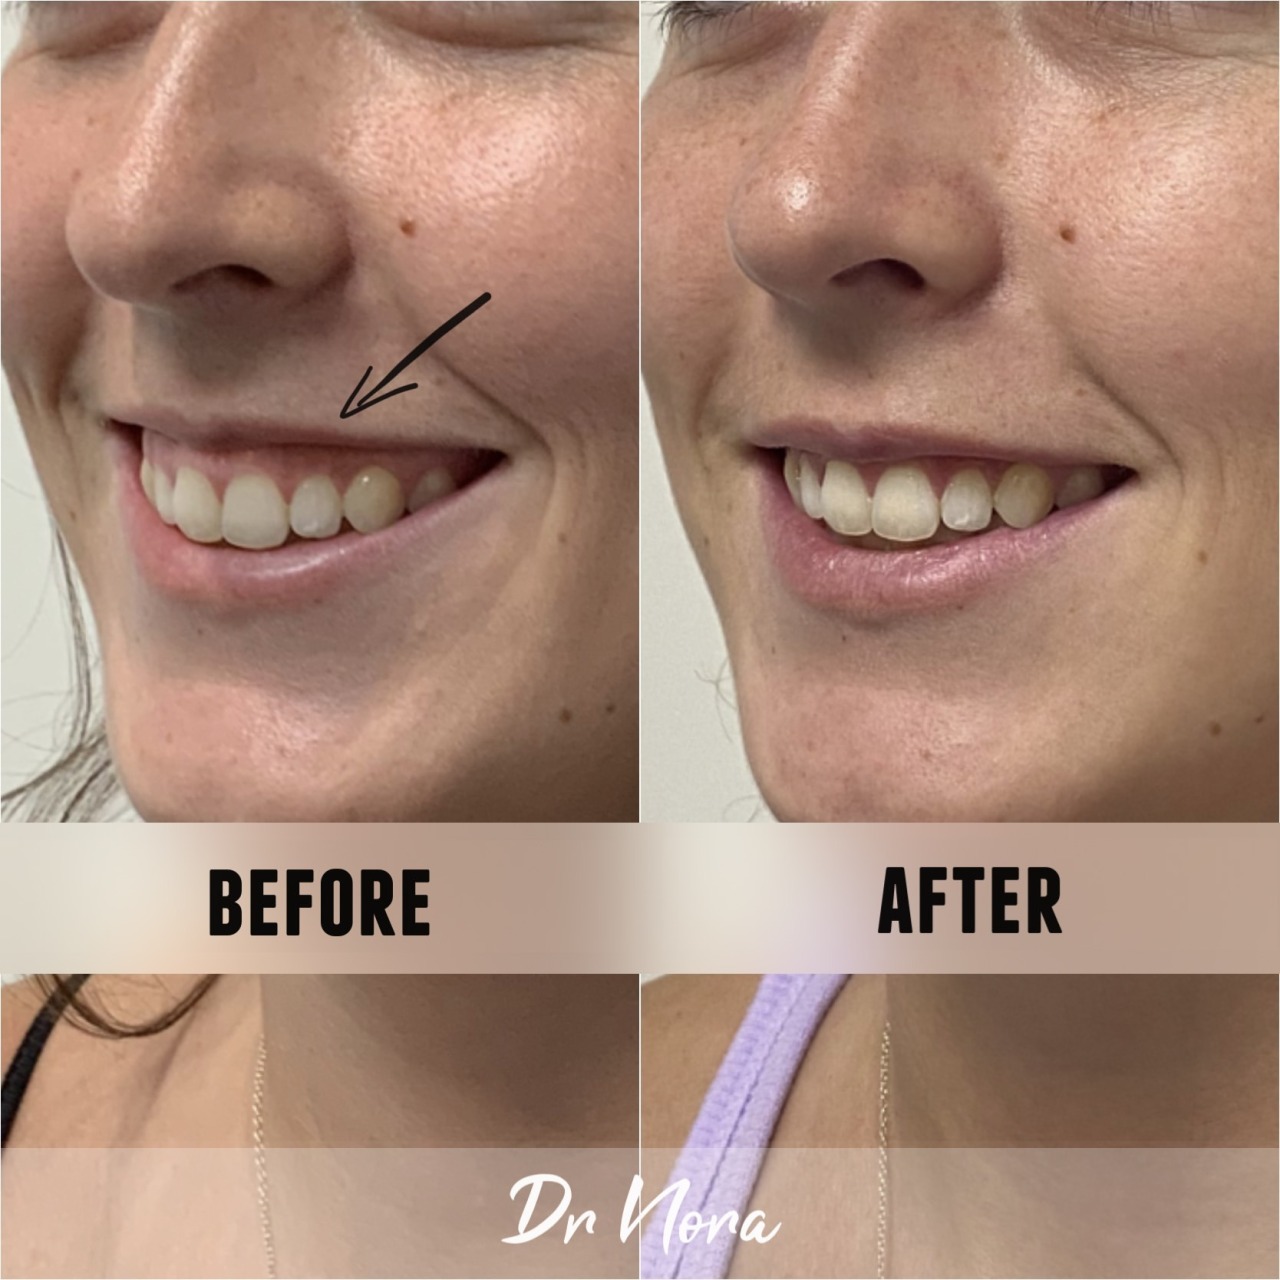 Anti-wrinkle treatment of a gummy smile ðŸ˜ƒAnti-wrinkle therapy can be used to reduce the appearance of a gummy smile. Treatment time is 15 minutes, optimal results are seen at 2 weeks and lasts up to 3-5 months.
If you have any questions or would like...